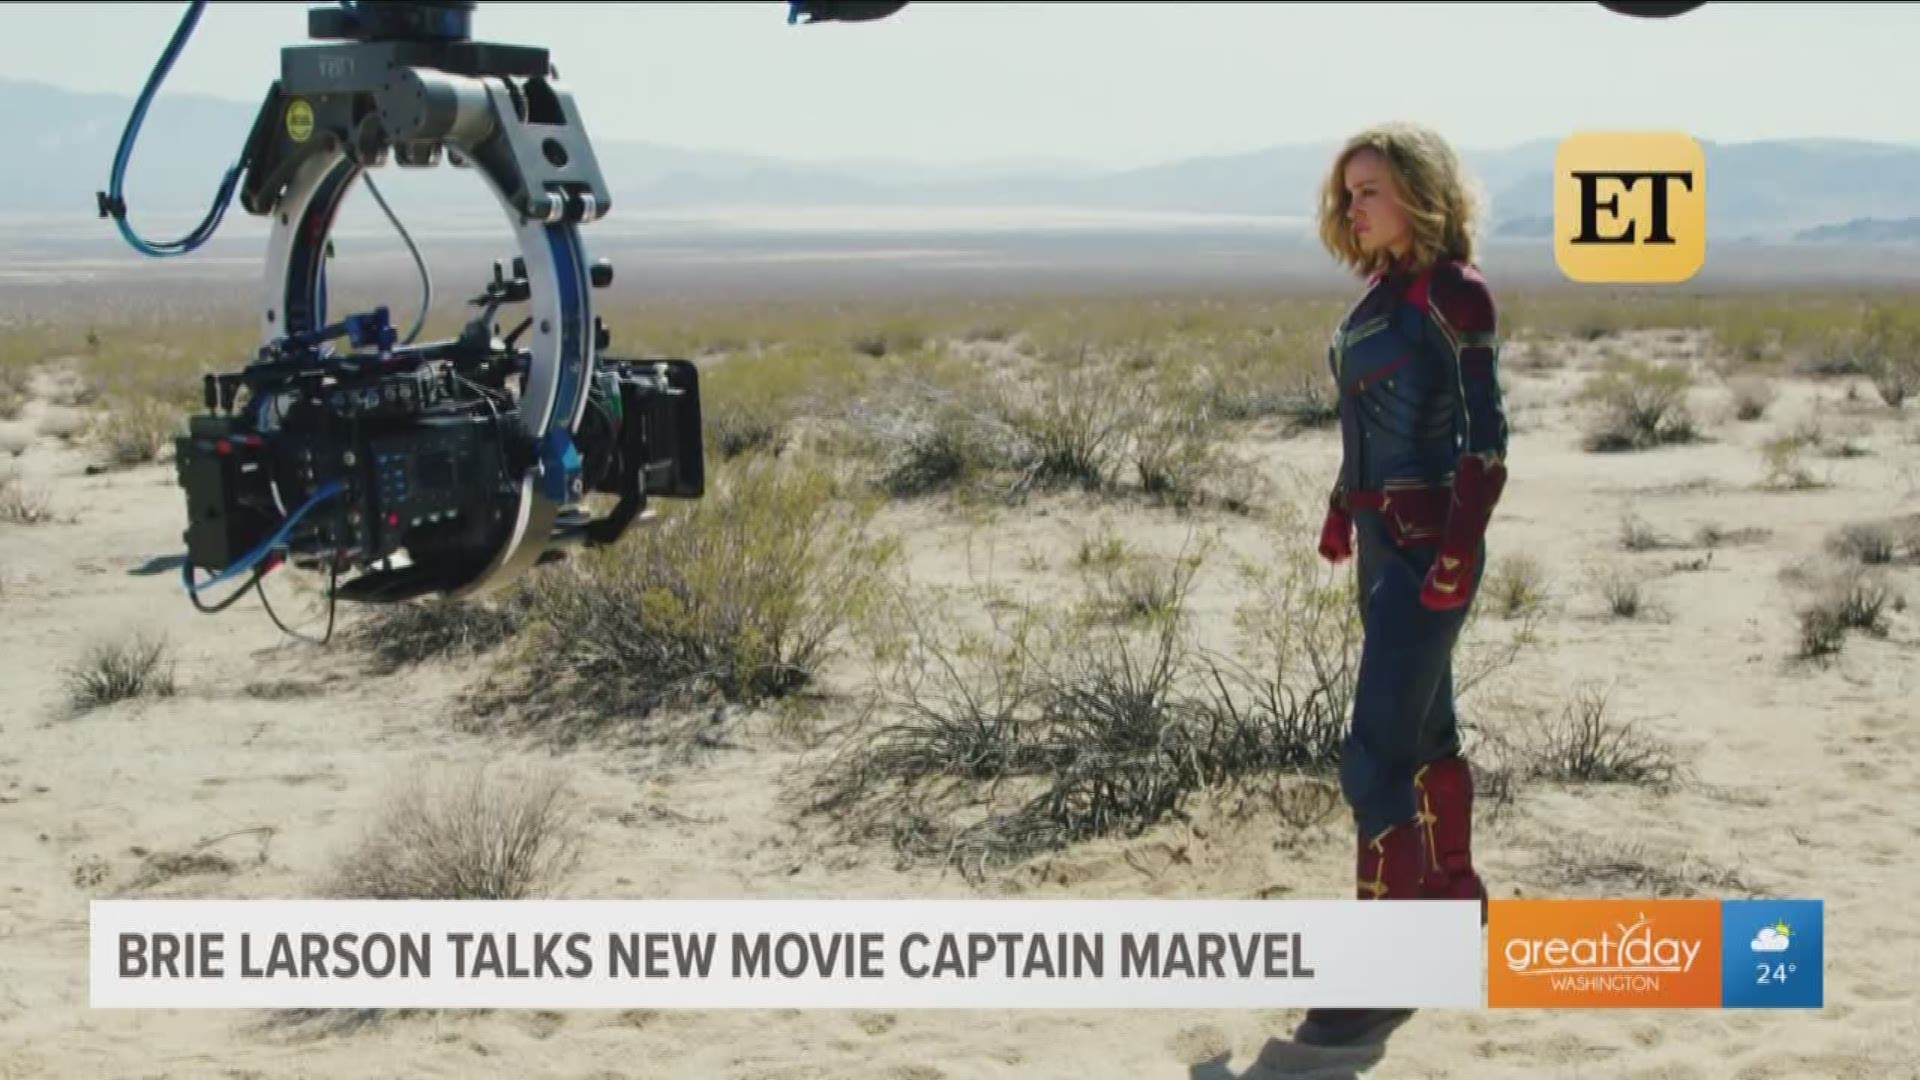 Entertainment Tonight's Kevin Frazier talks about the premier of Captain Marvel starring Brie Larson and Samuel L. Jackson.